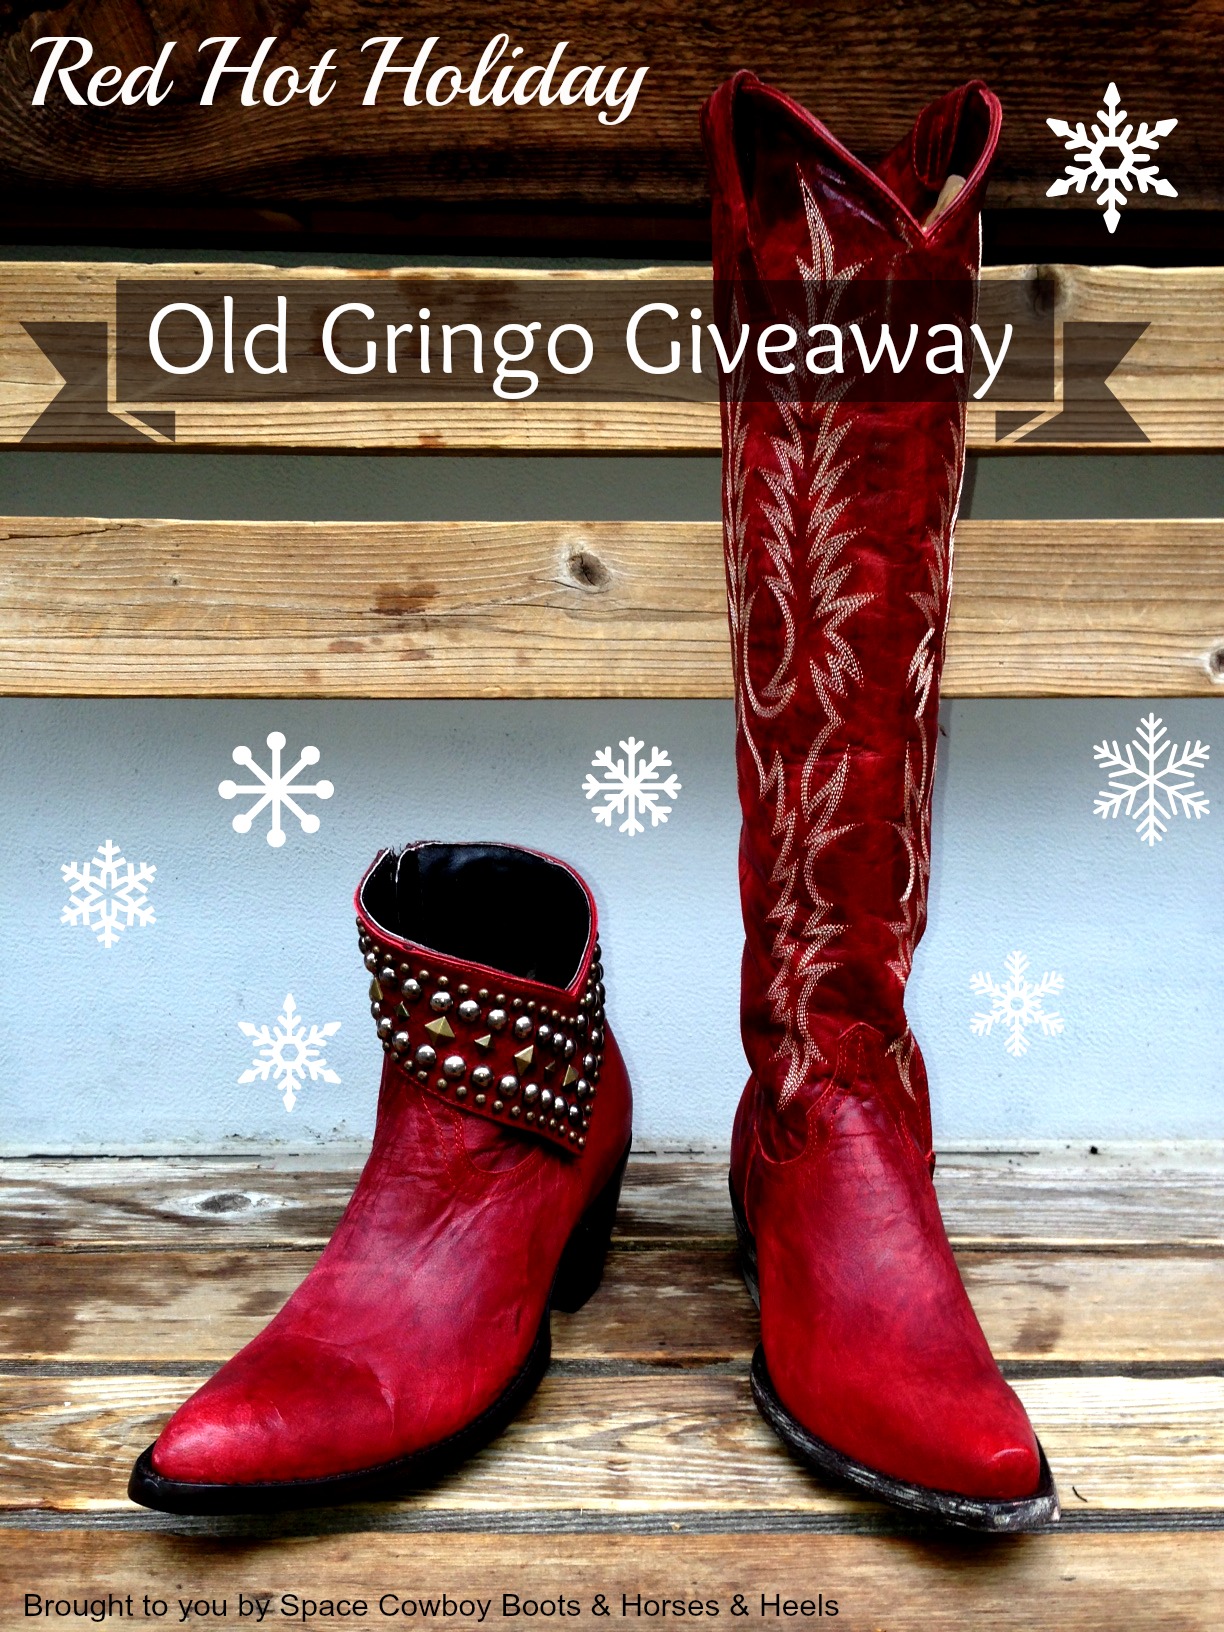 Old Gringo Red Hot Holiday Giveaway